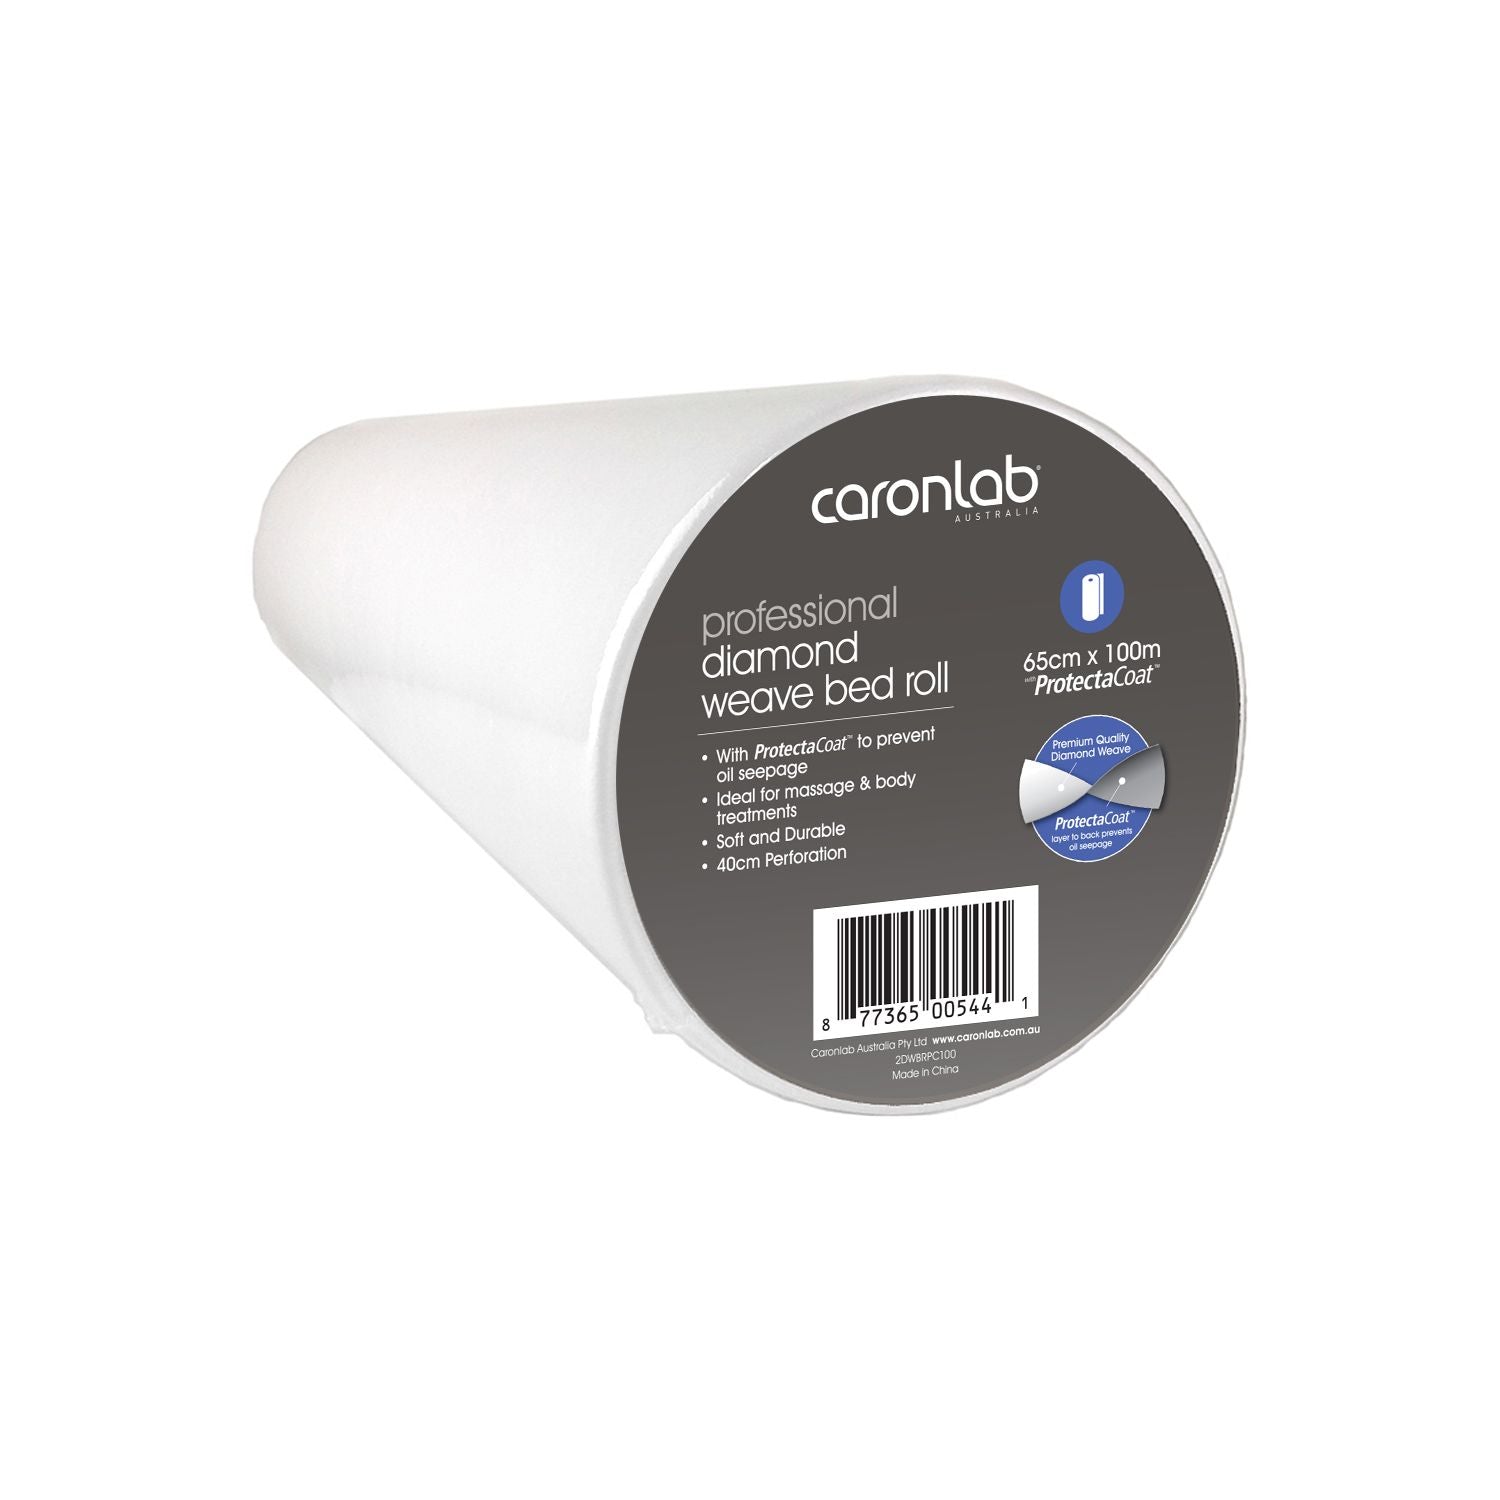 Caronlab Diamond Weave Bed Roll with Protectacoat (65cm perforation) 65cm x 100mt